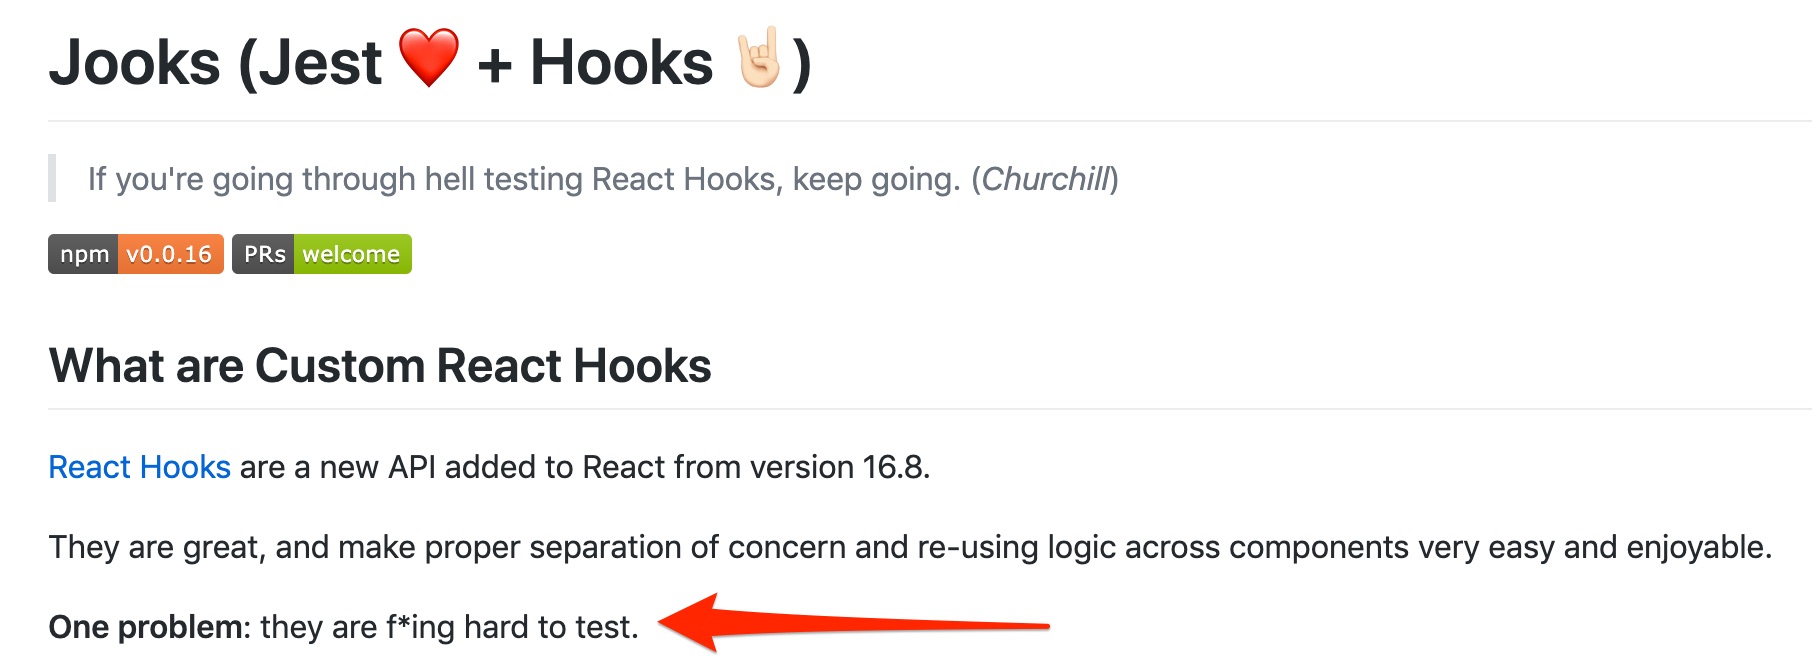 Jooks is a library stating that React Hooks are f*ing hard to test.